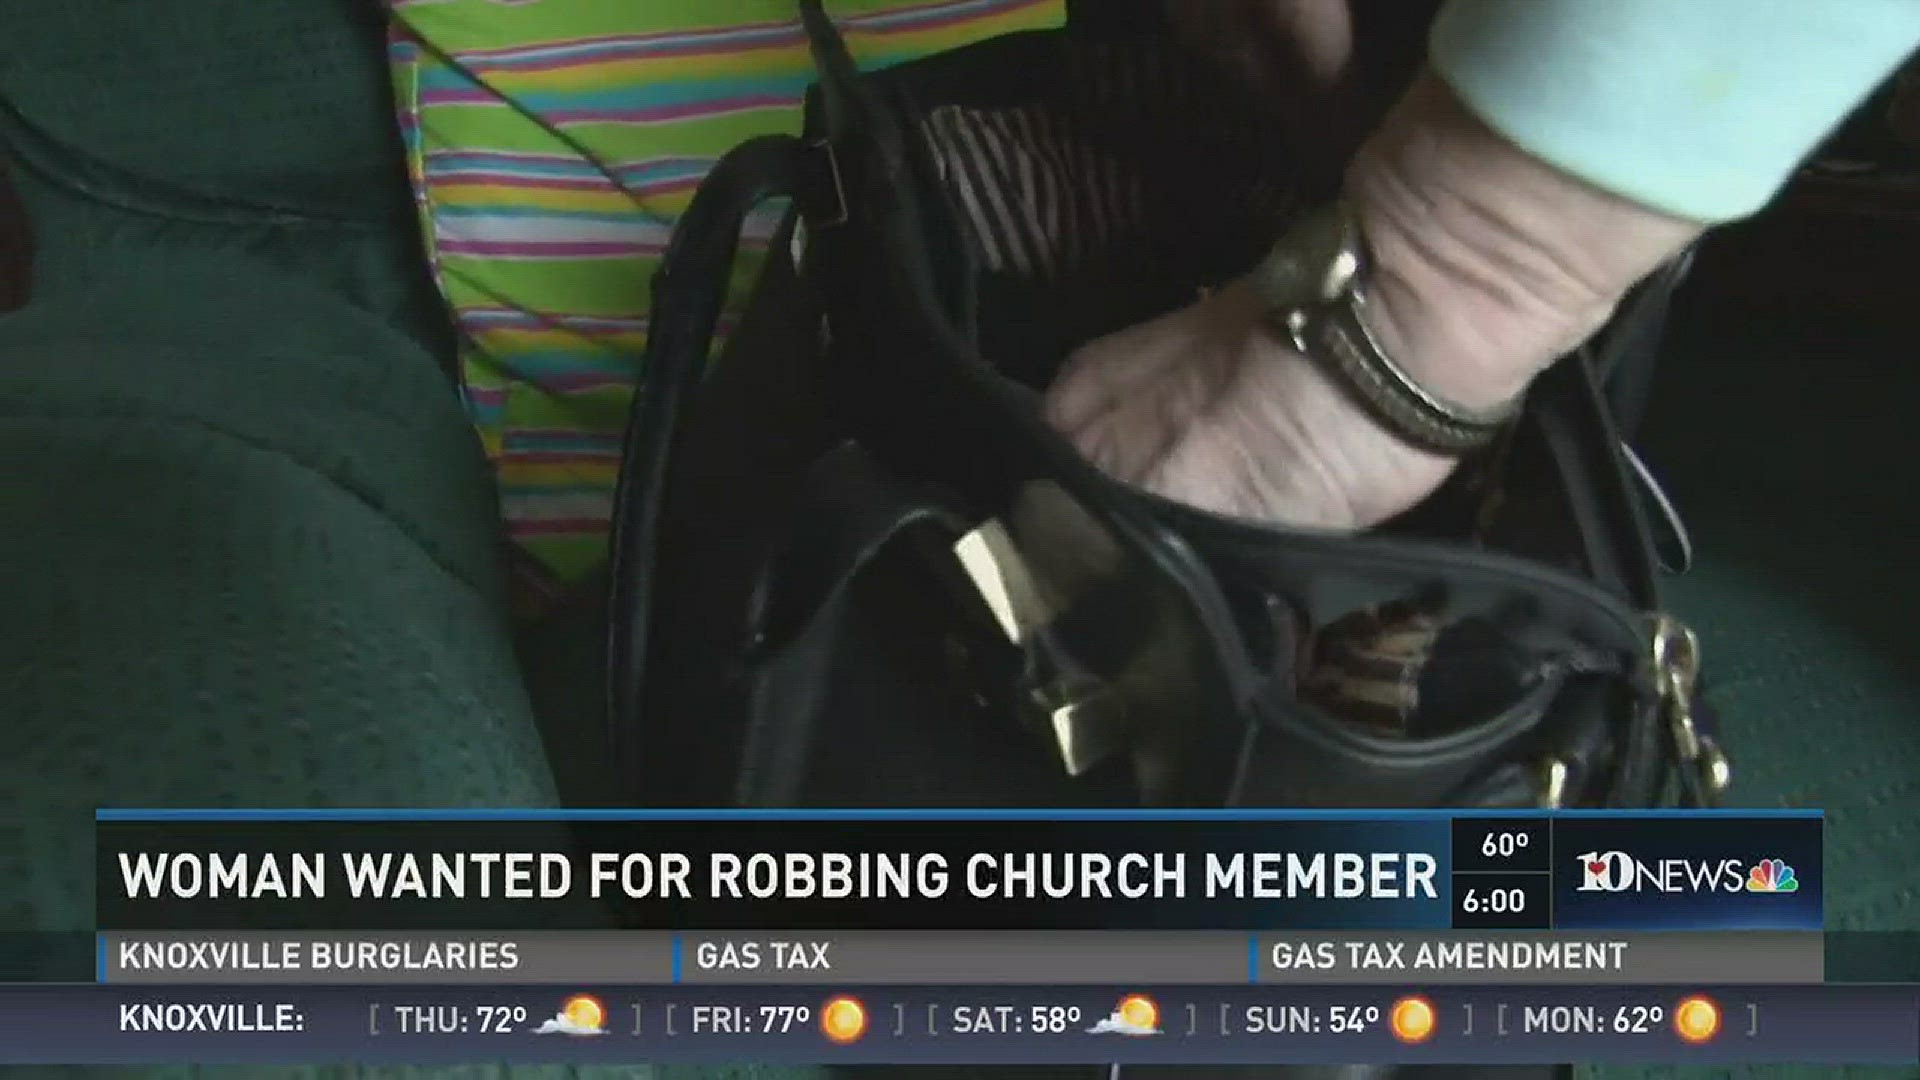 Feb. 22, 2017: Investigators are searching for a woman accused of robbing a church member following a Christmas Eve service.